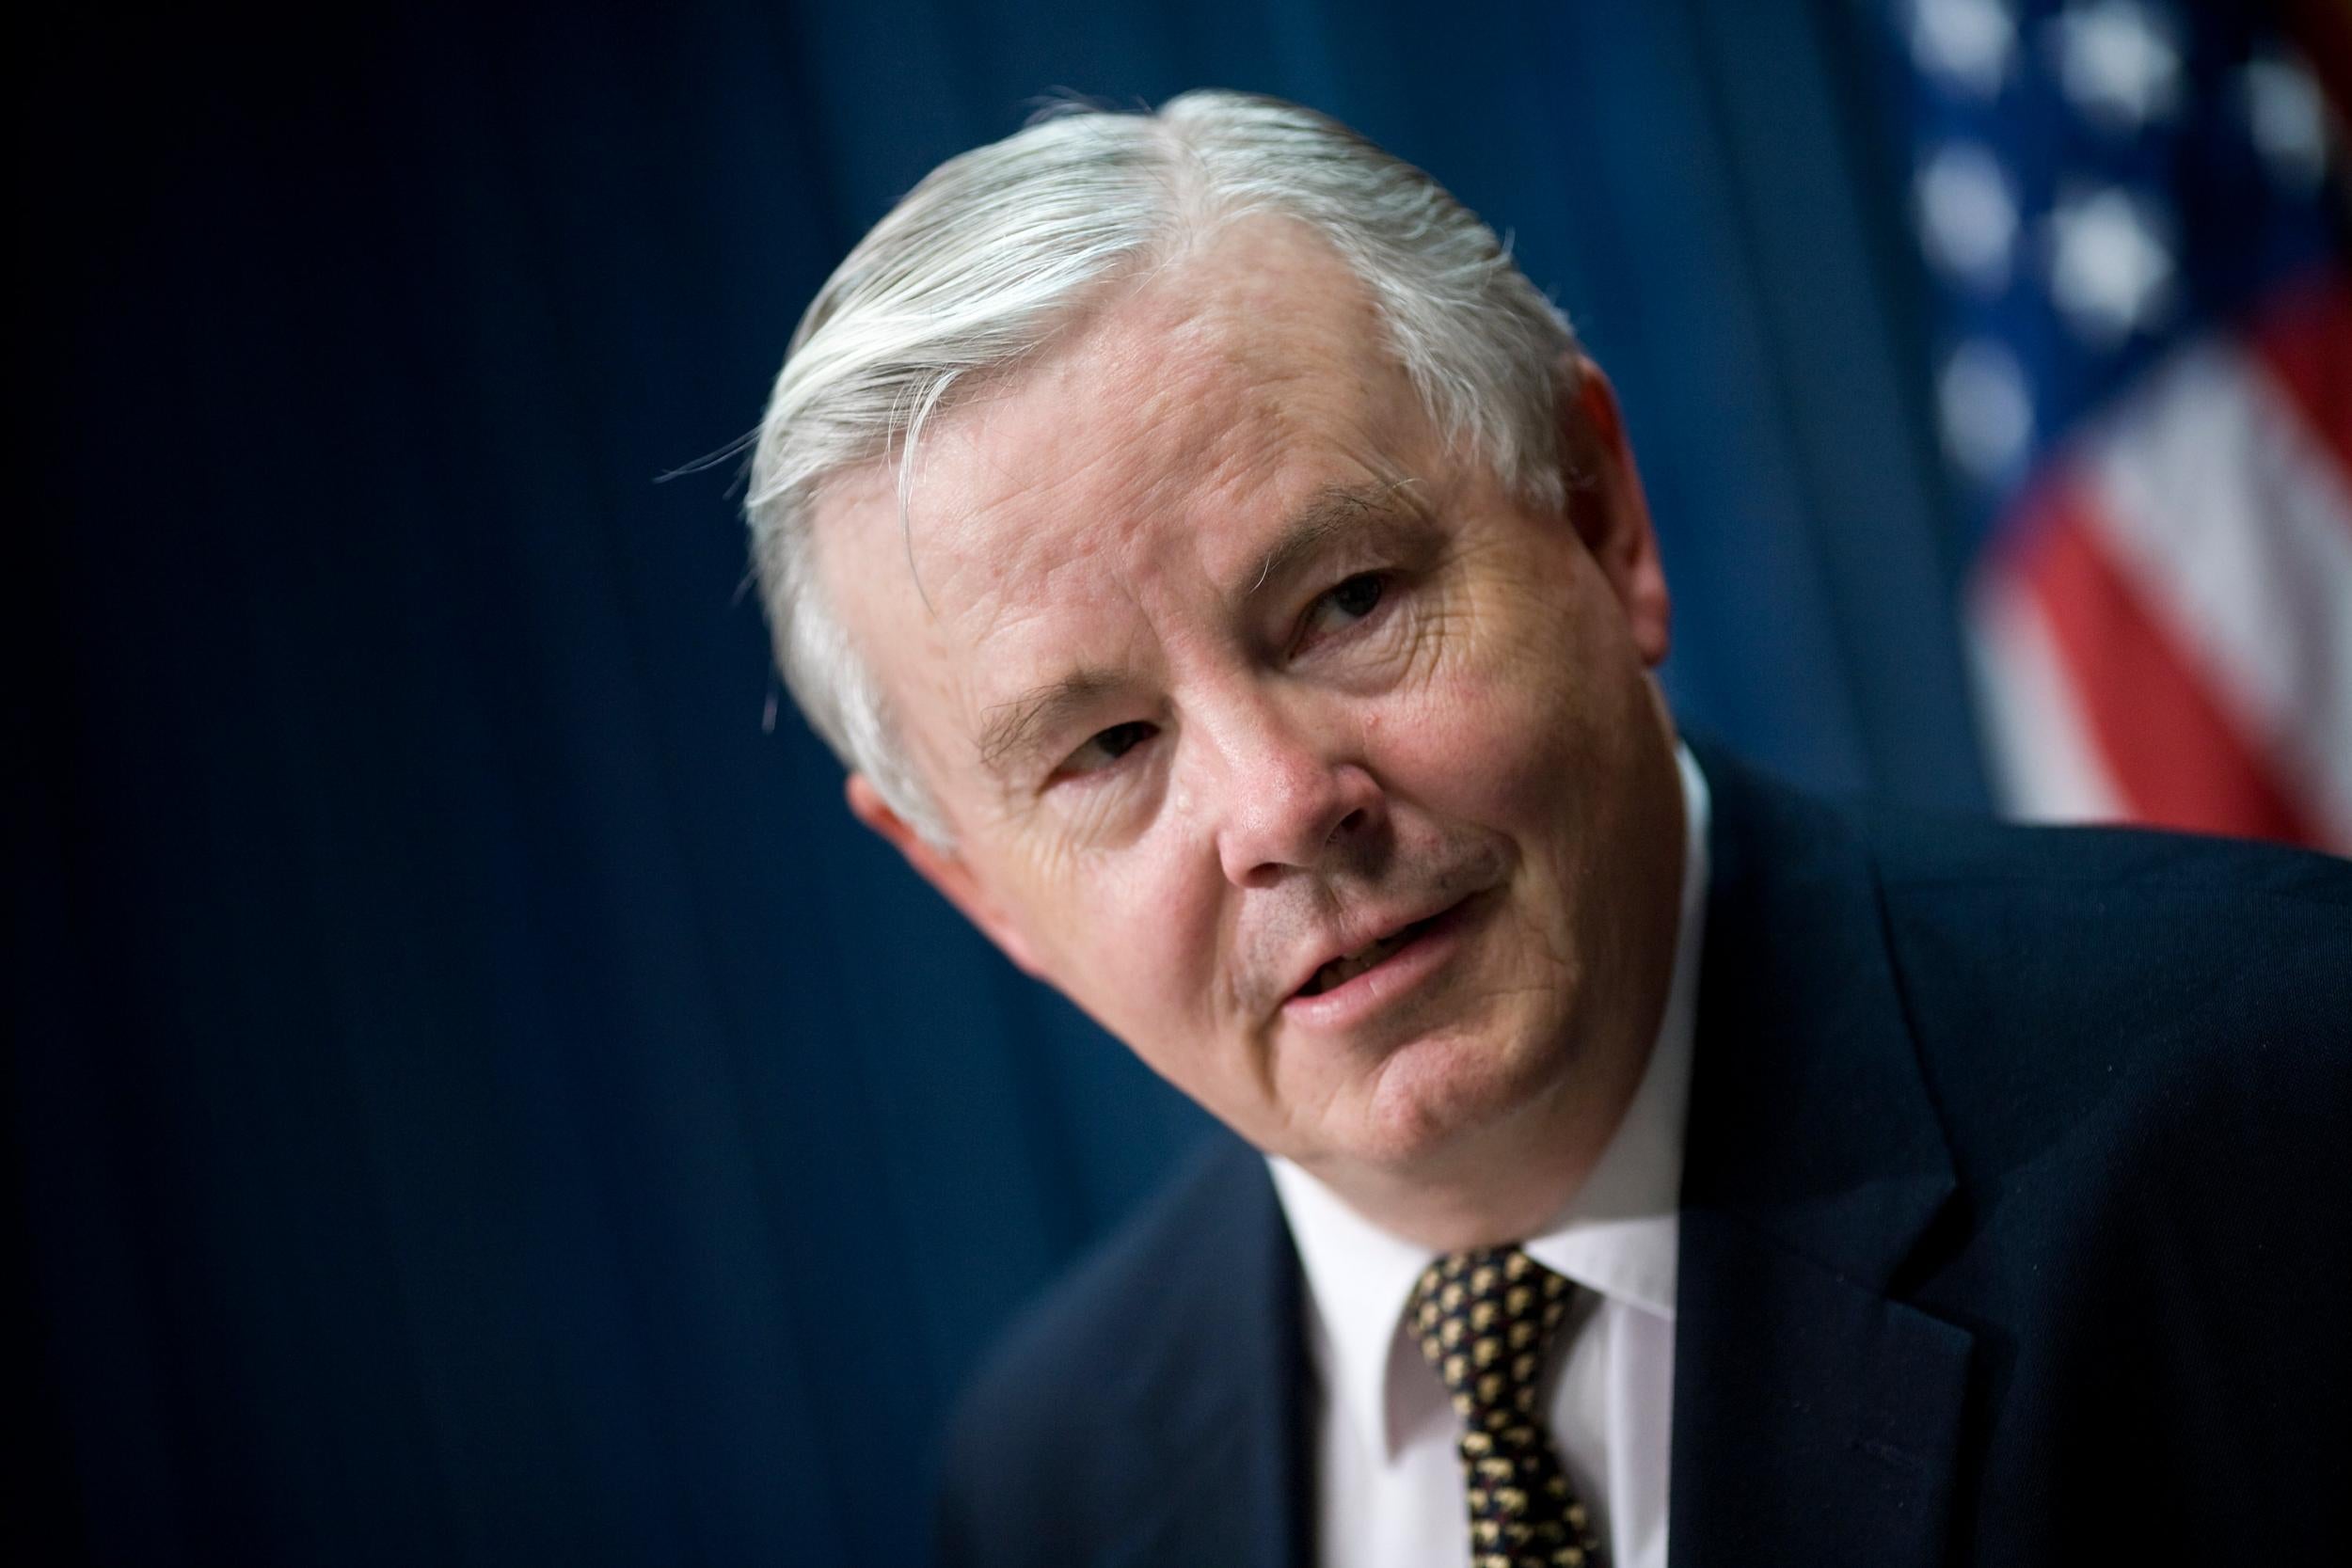 Representative Joe Barton called for certain websites to be shut down if they're used by Isis